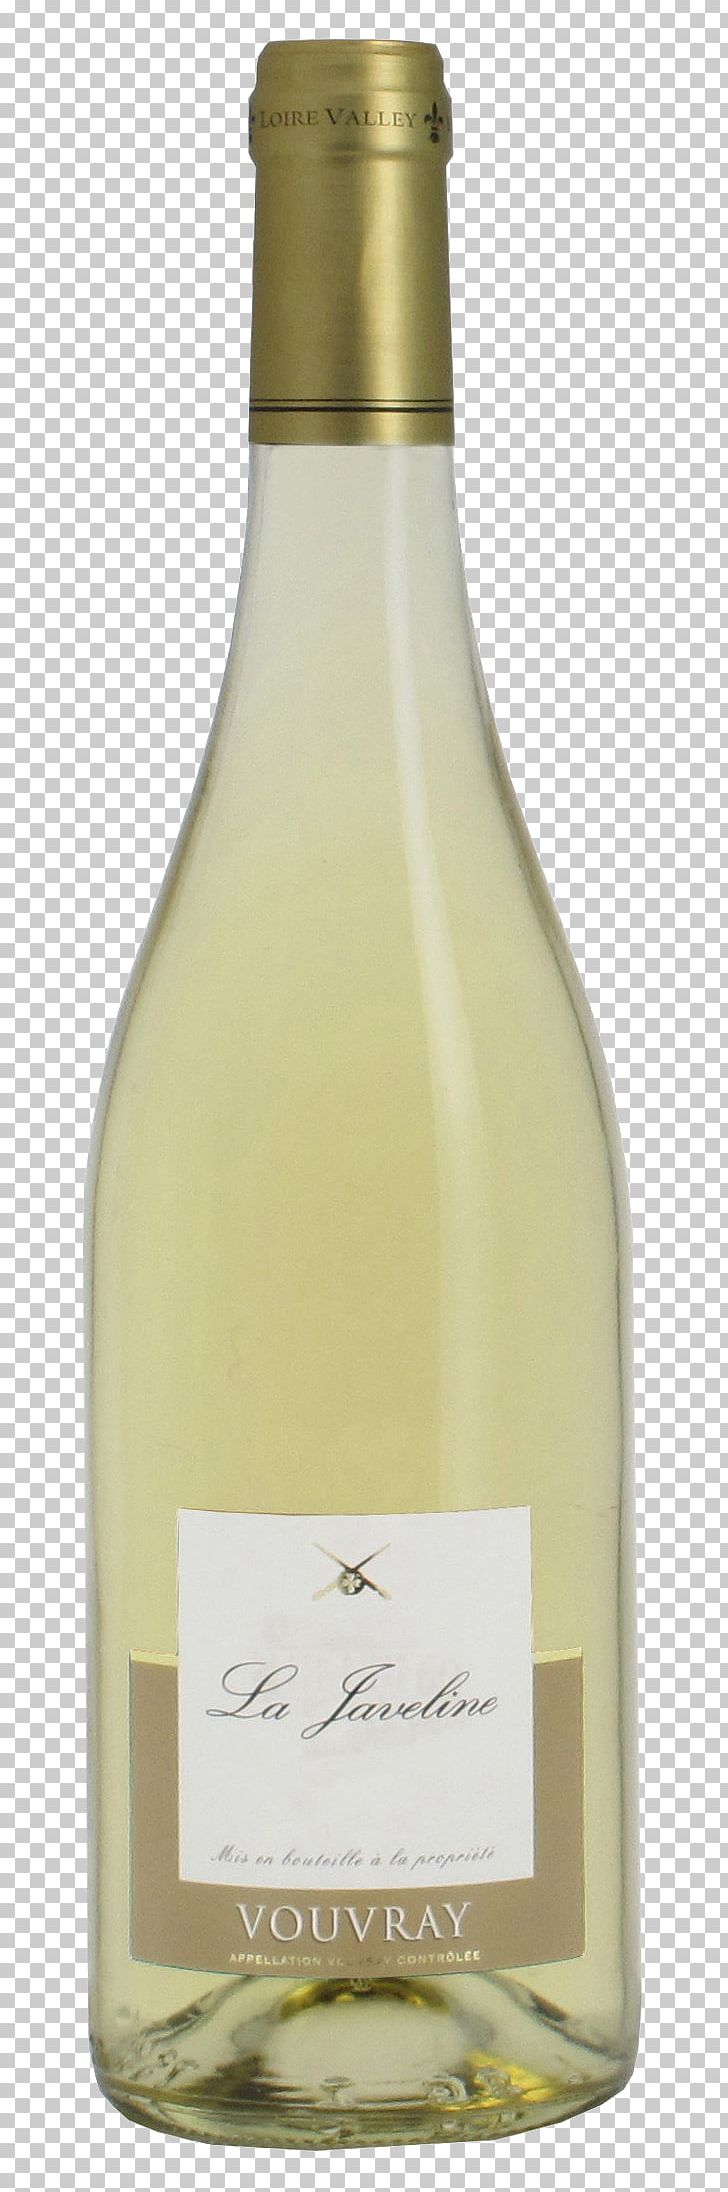 Champagne White Wine Liqueur Glass Bottle PNG, Clipart, Alcoholic Beverage, Bottle, Champagne, Drink, Food Drinks Free PNG Download